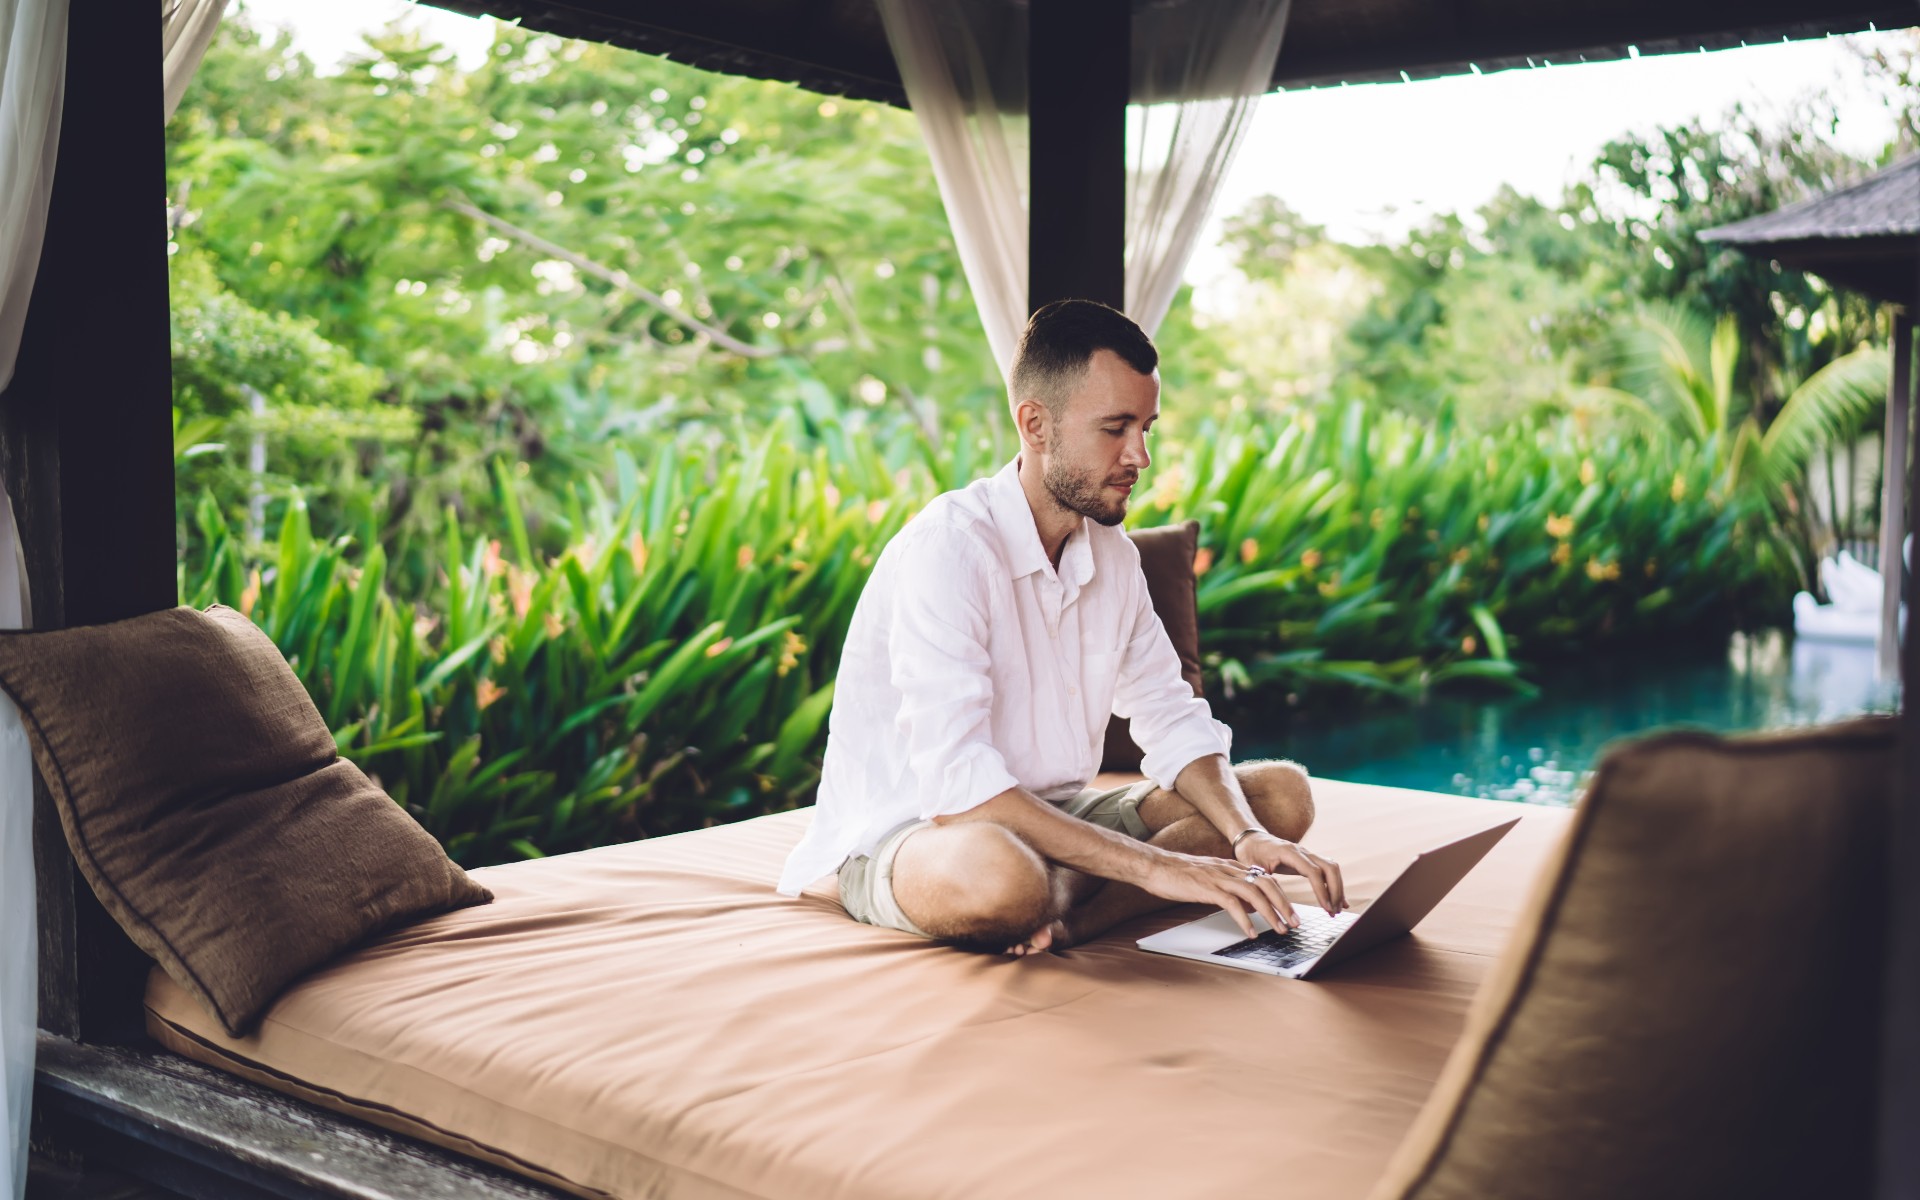 What Is a Digital Nomad?